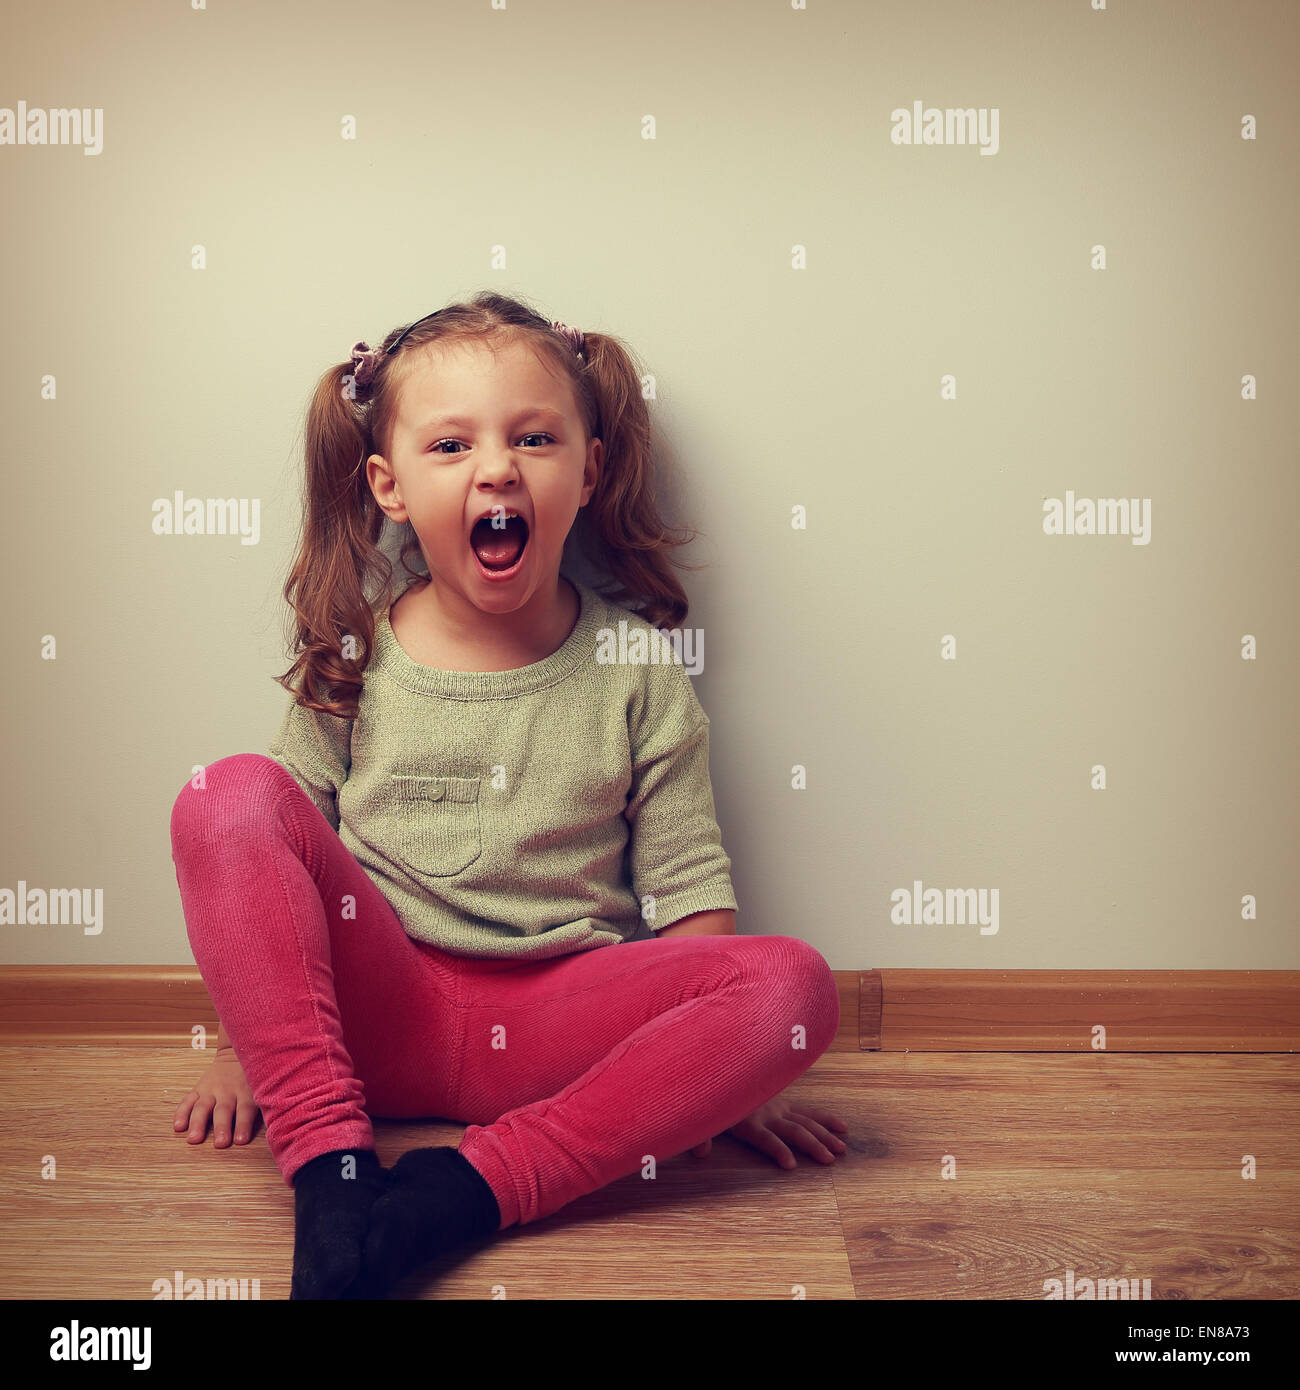 Happy crying kid with open mouth sitting on the floor in fashion clothes. Vintage color portrait Stock Photo